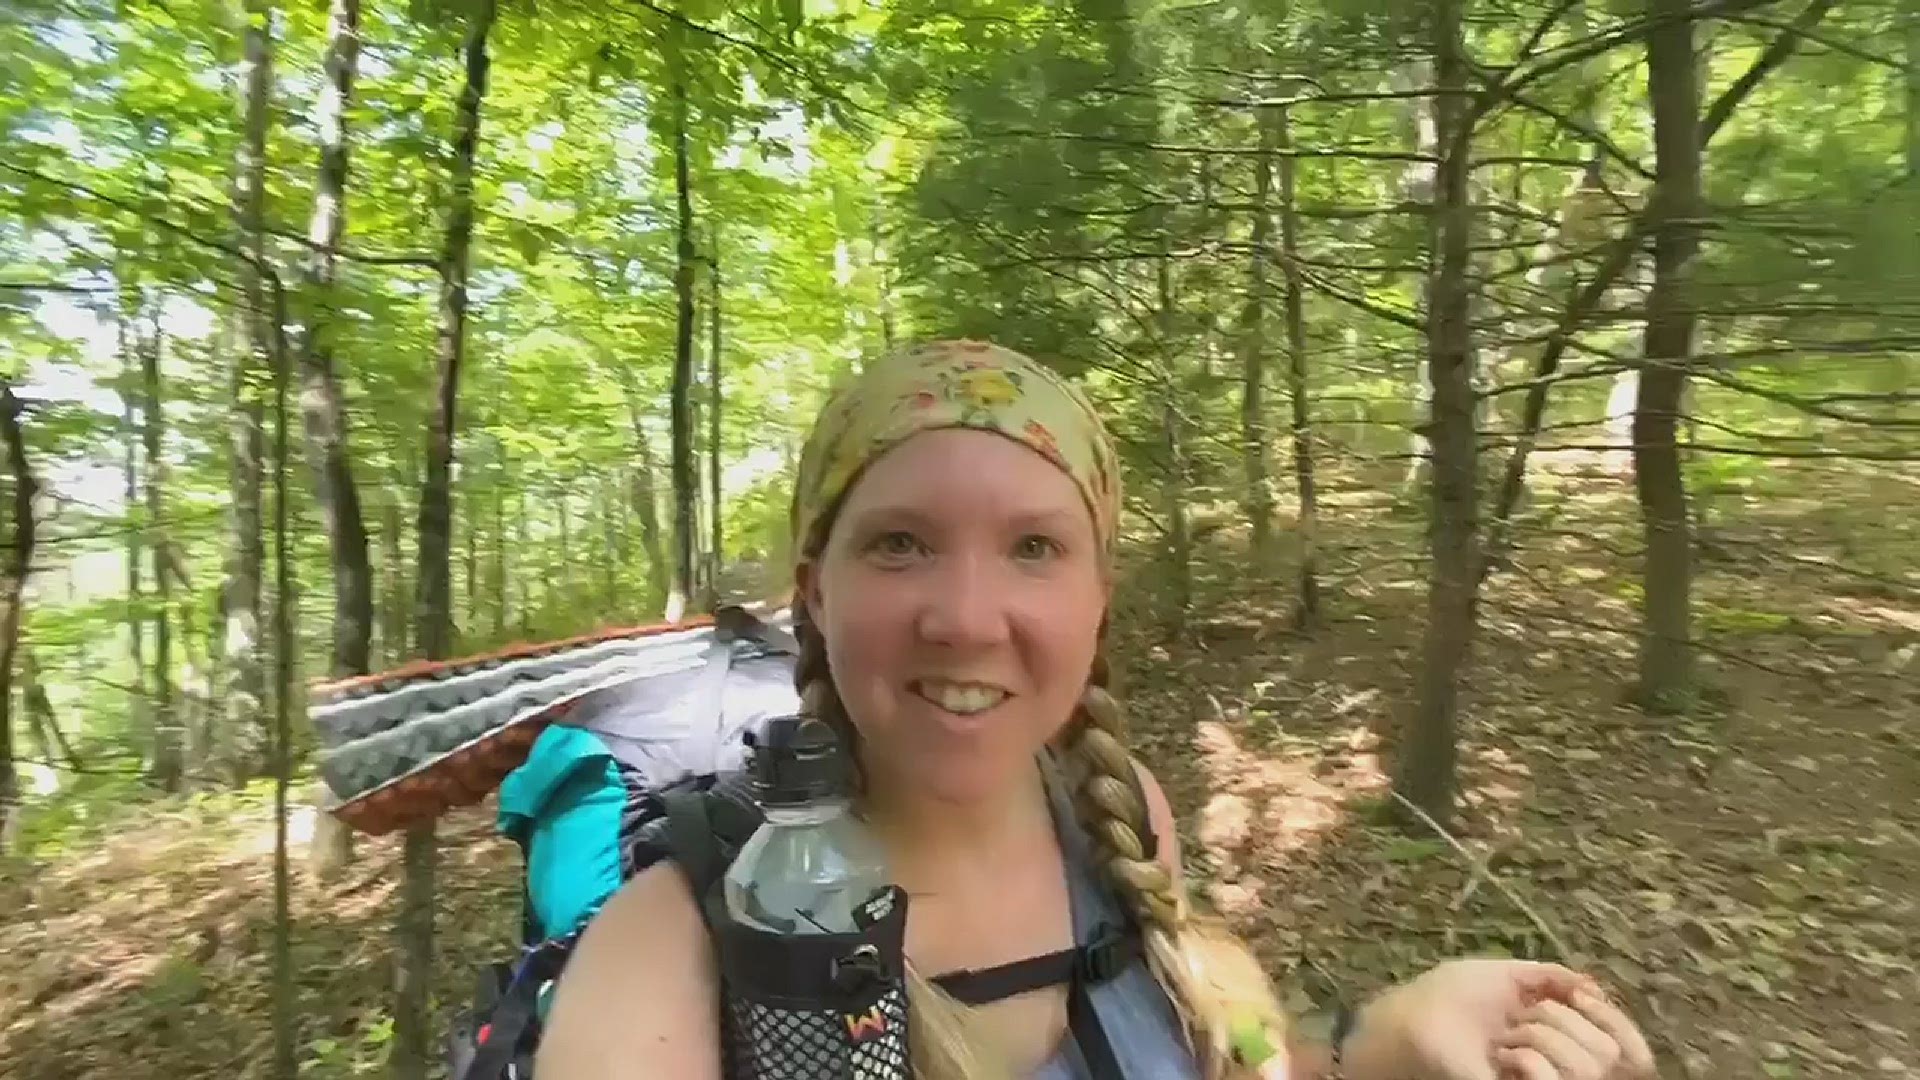 After returning home for two months as a precaution against COVID-19, Gretchen Pardon and Baby Yoda are back on the Appalachian Trail.